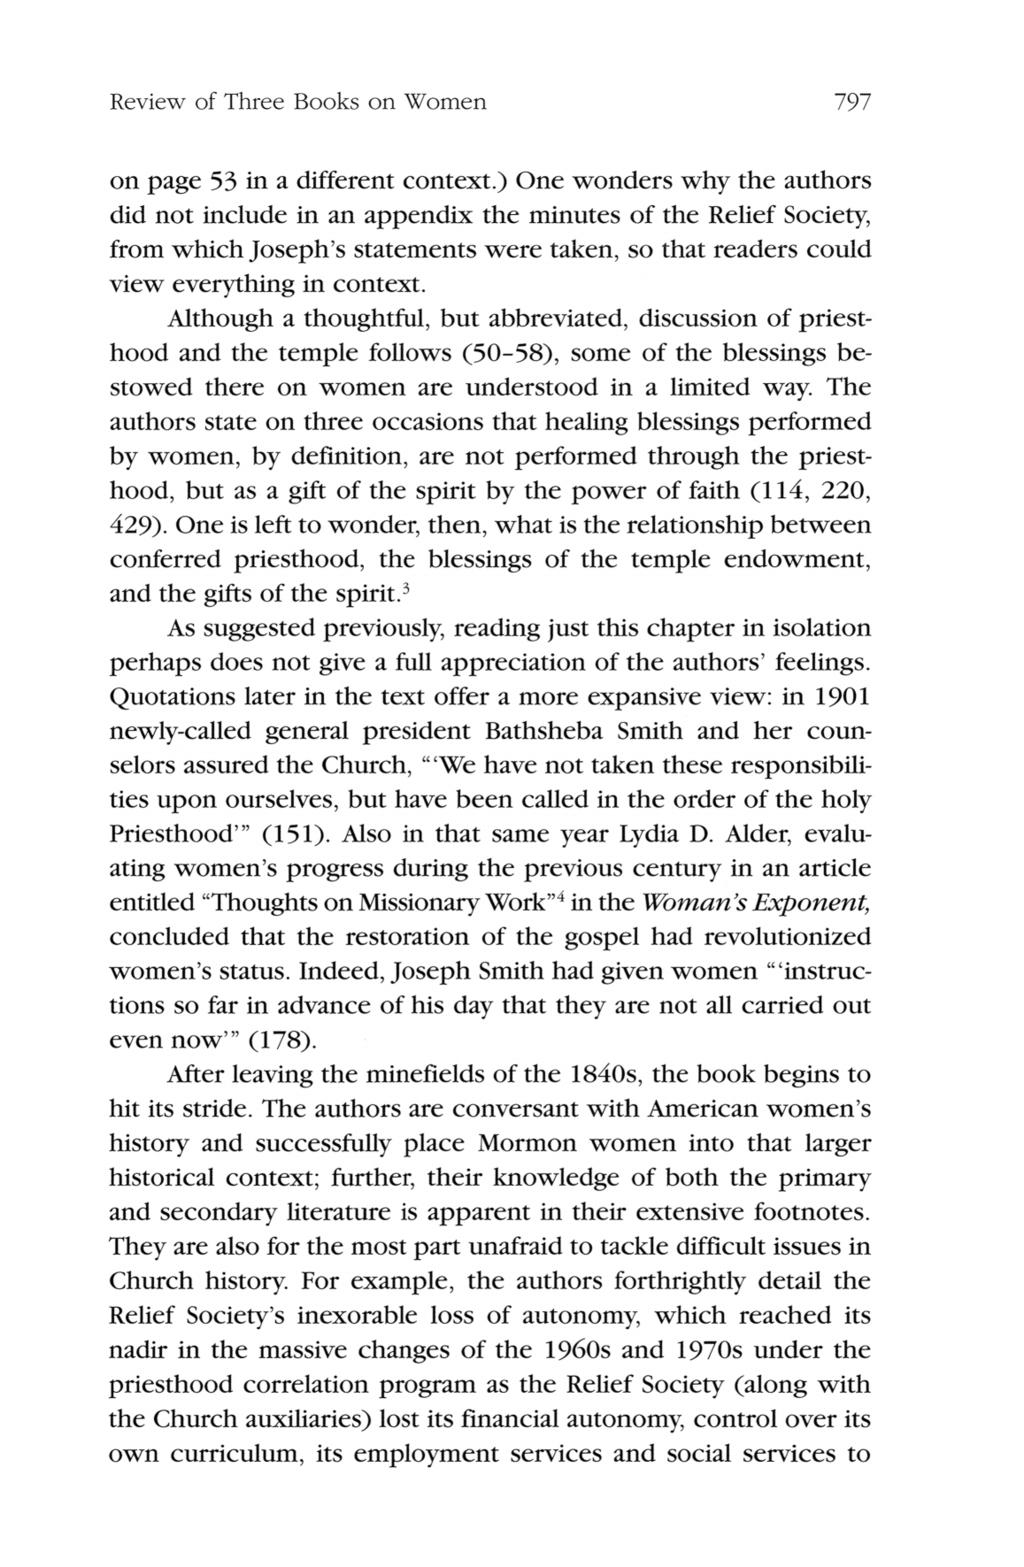 Richards: <em>women of Covenant: The Story of Relief Society</em> by Jill M review of three books on women 797 on page 53 in a different context one wonders why the authors did not include in an